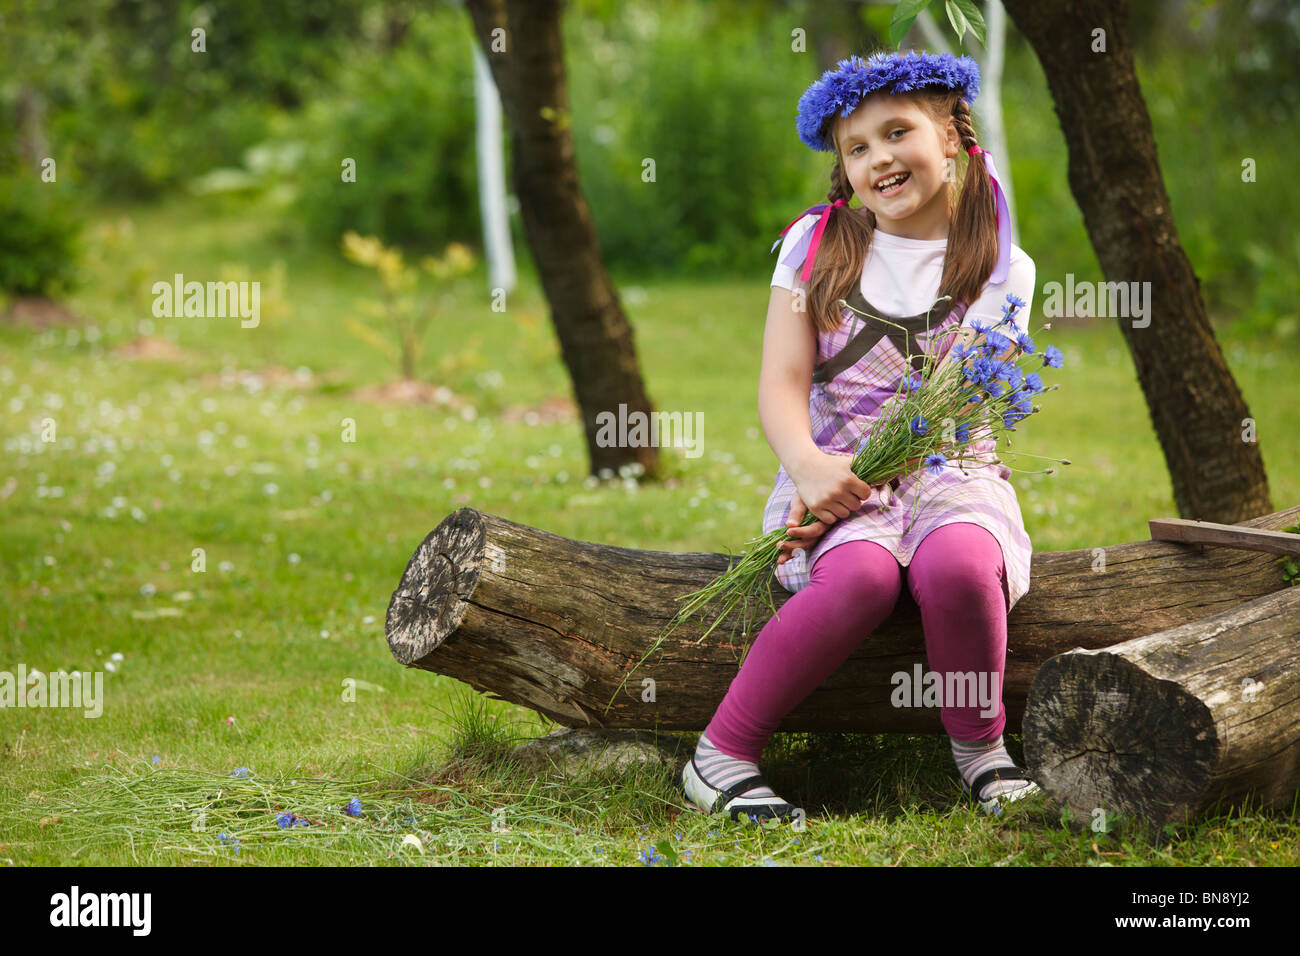 Little girl with a chaplet made from blue flowers Stock Photo